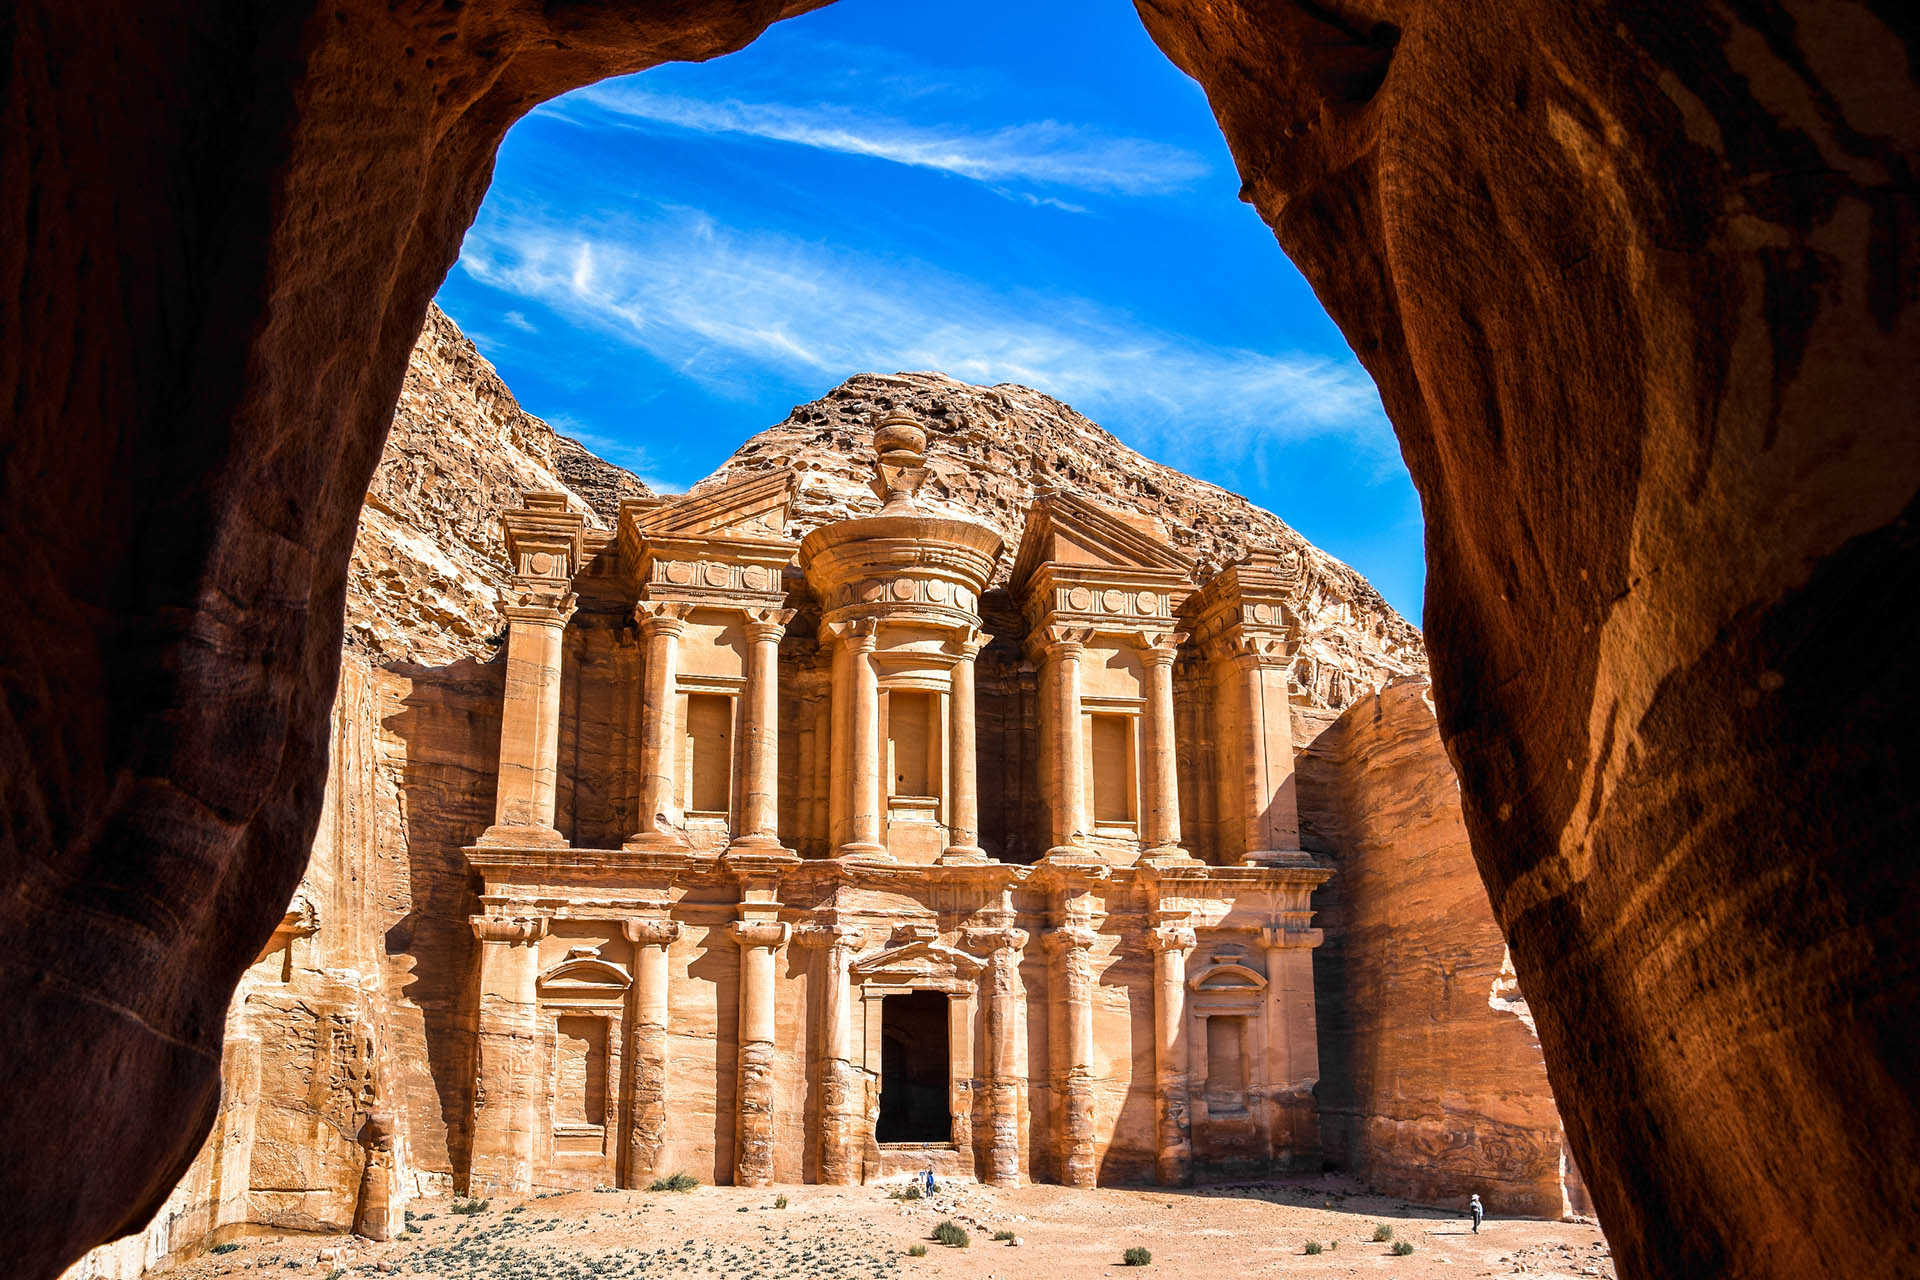 Petra: The Rose-Red City Carved into Rock